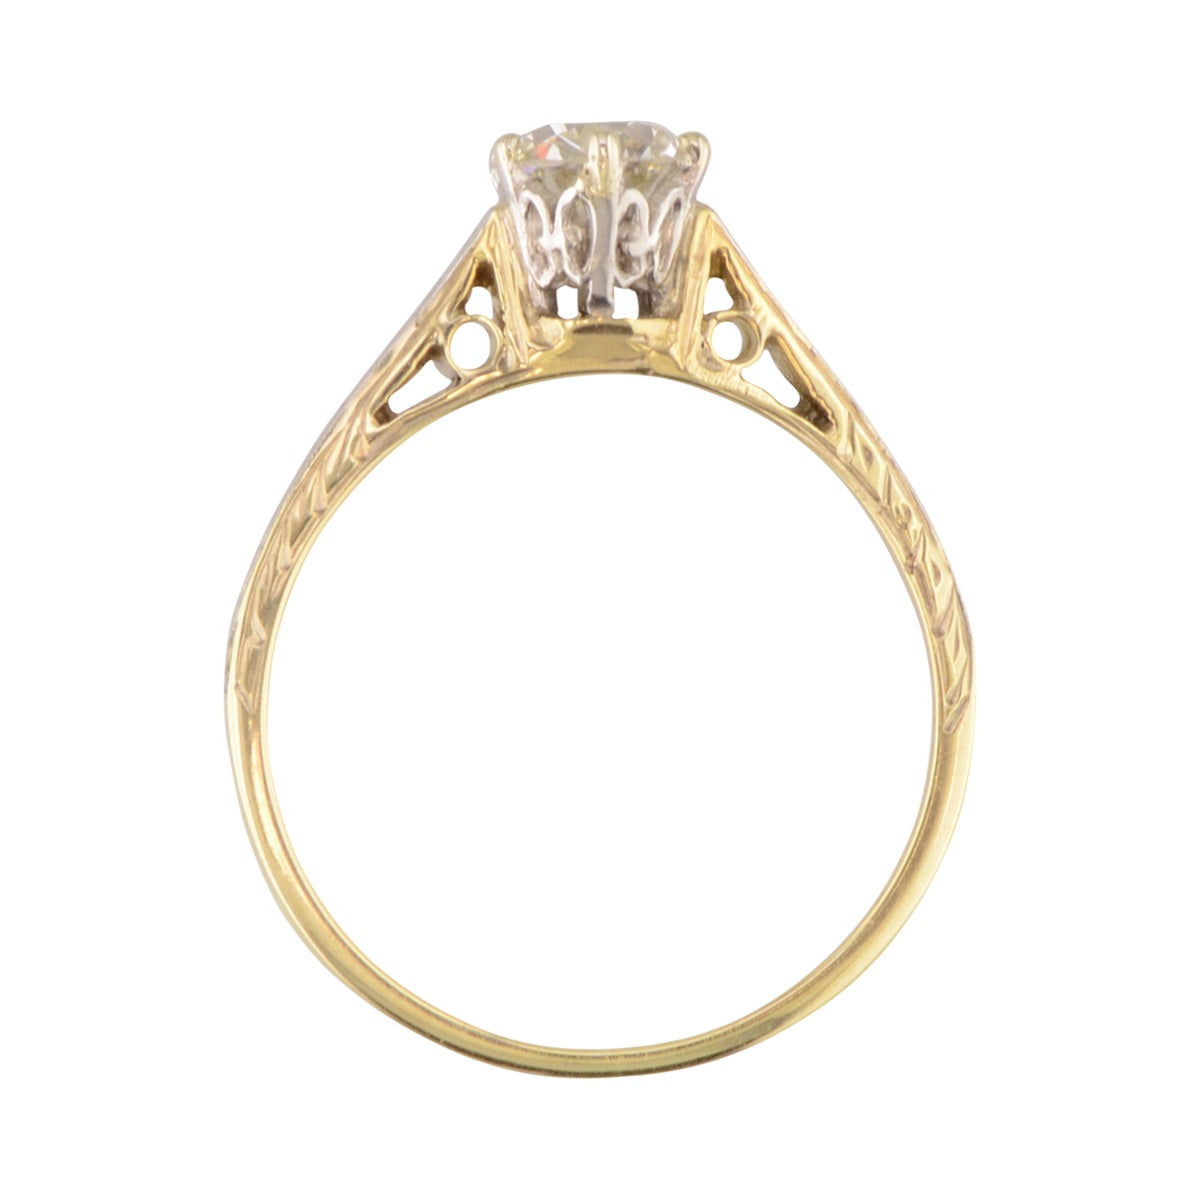 'Greta' cathederal style antique engagement ring. 